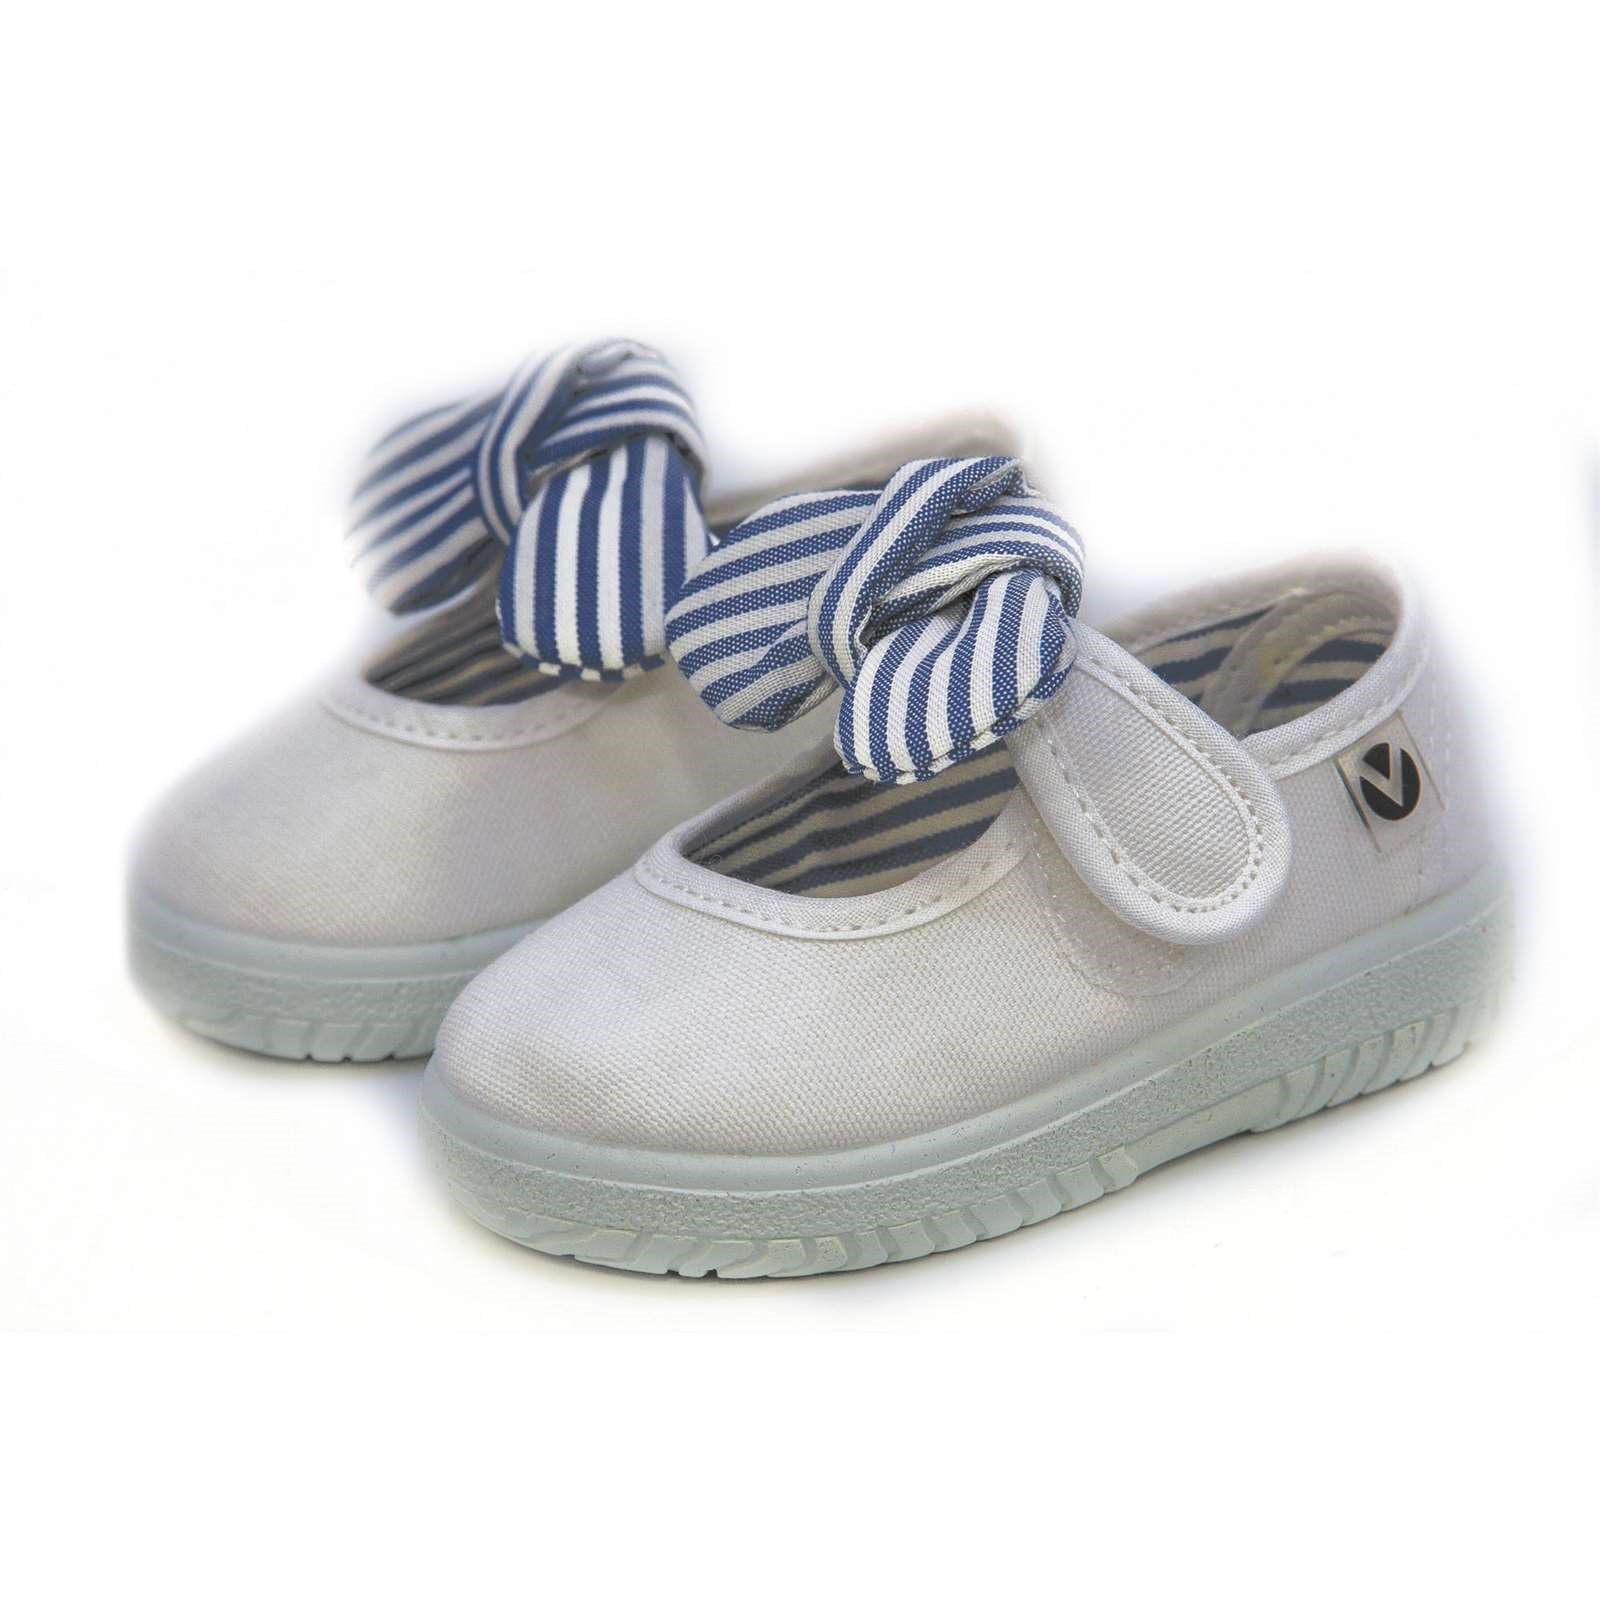 Victoria Girl Slip On Canvas Bow Shoes